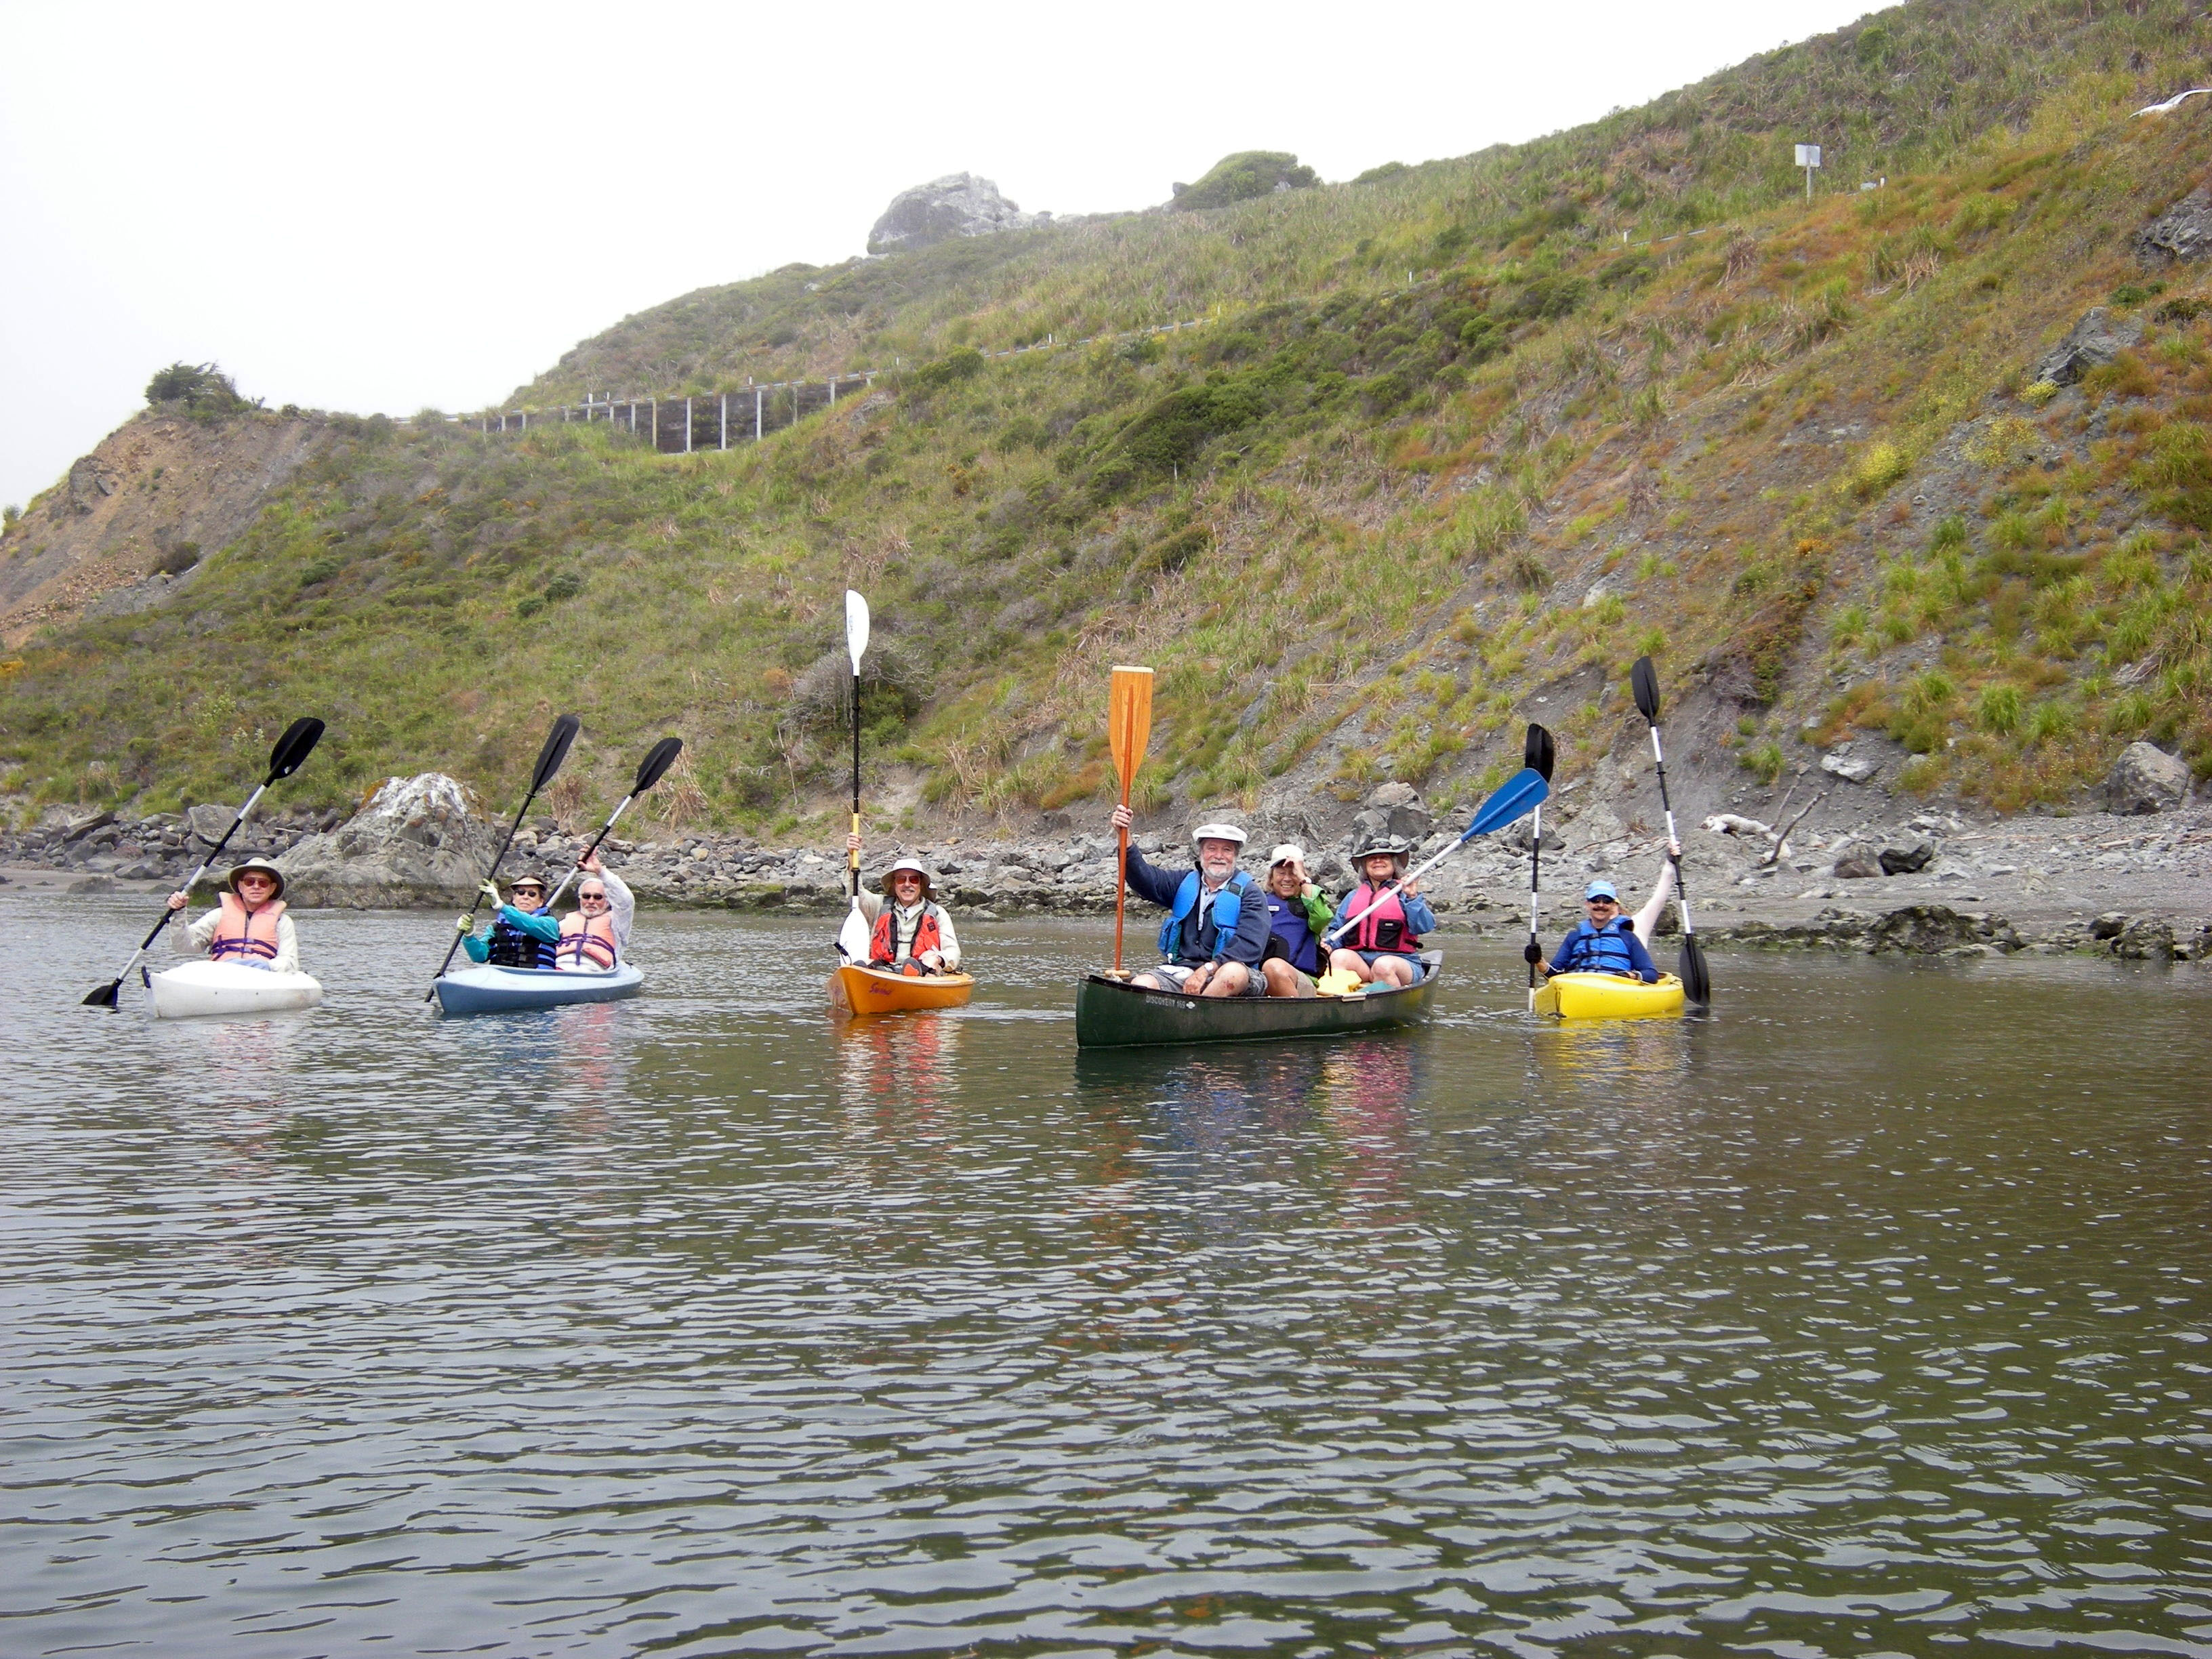 A group of people kayaking on a body of water